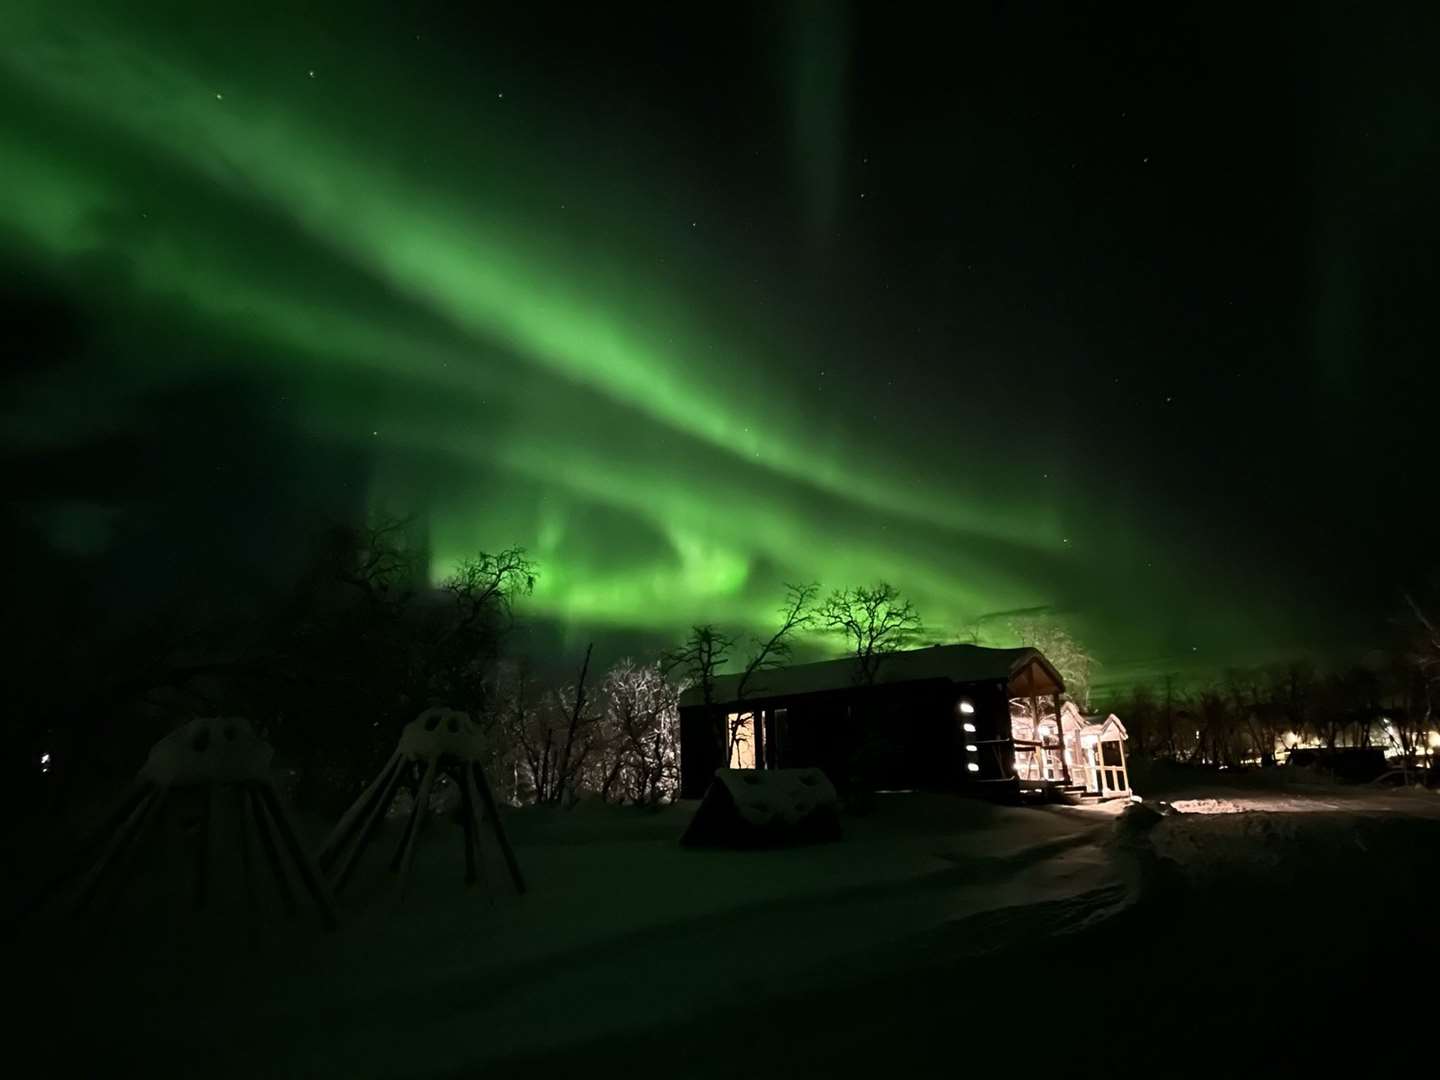 Rhionna said she experienced spectacular shows of the Northern Lights with the sky lighting up and streaks of purple "spinning and dancing" before her eyes.